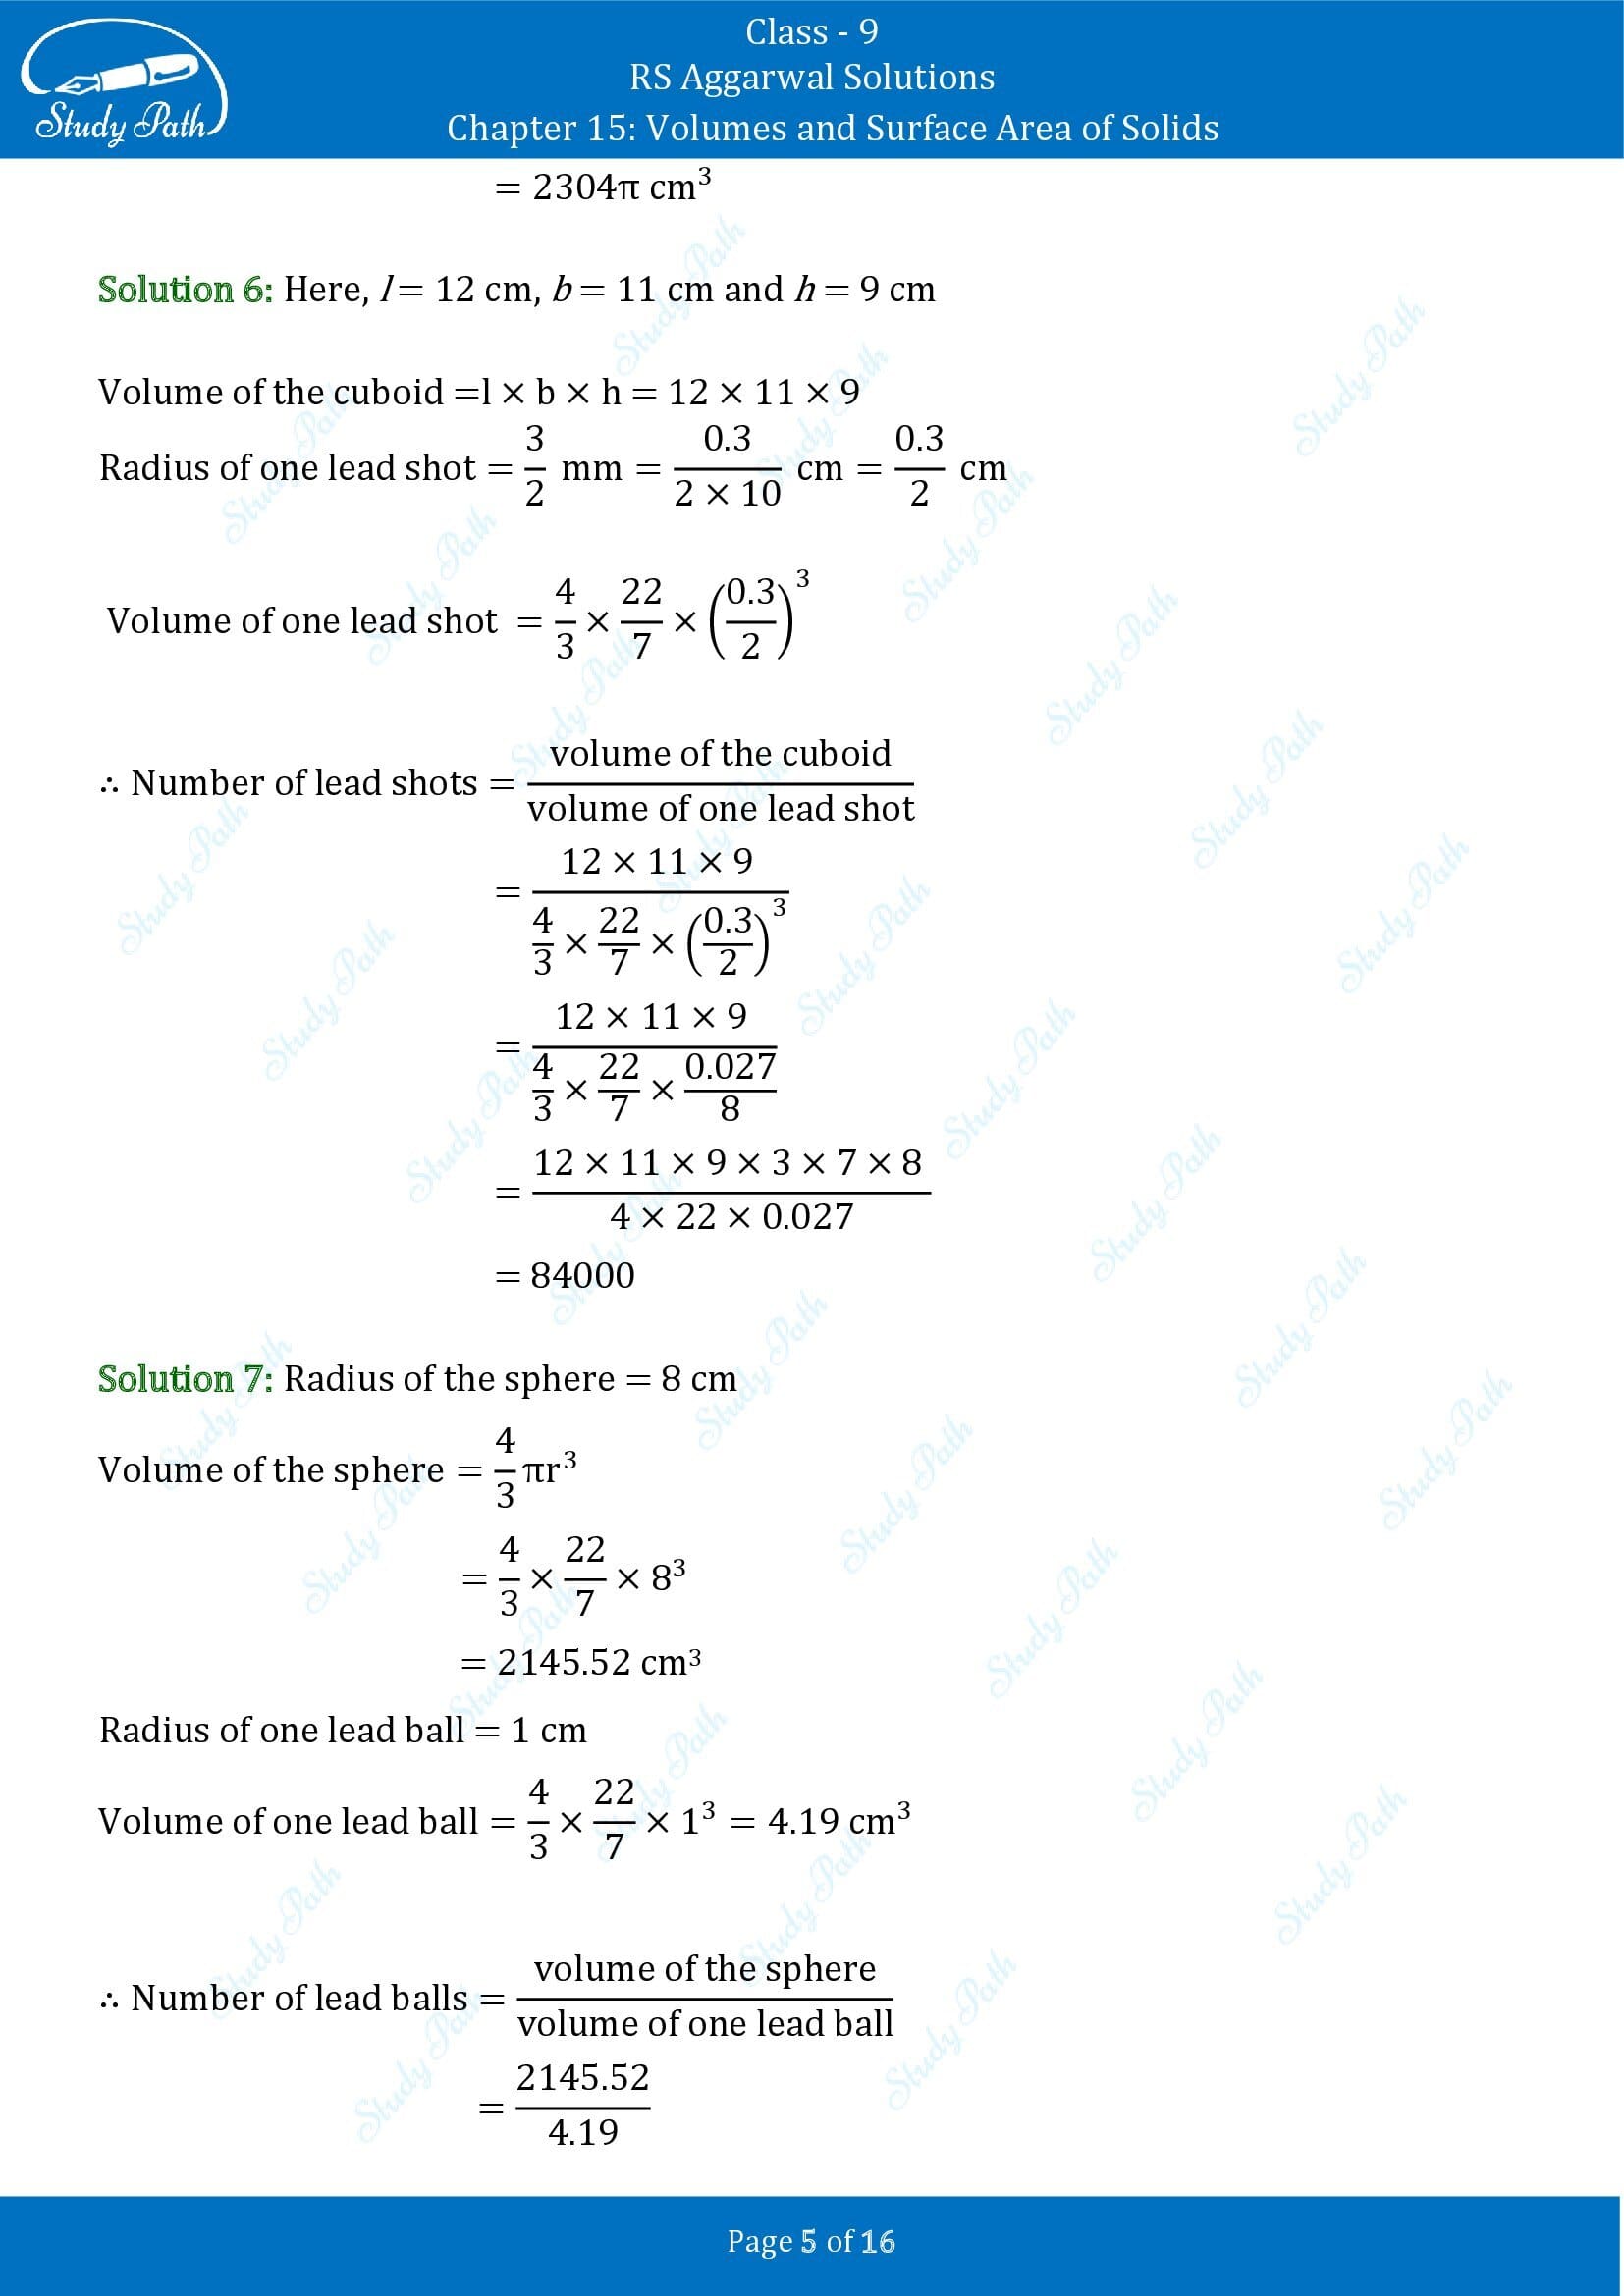 RS Aggarwal Solutions Class 9 Chapter 15 Volumes and Surface Area of Solids Exercise 15D 00005